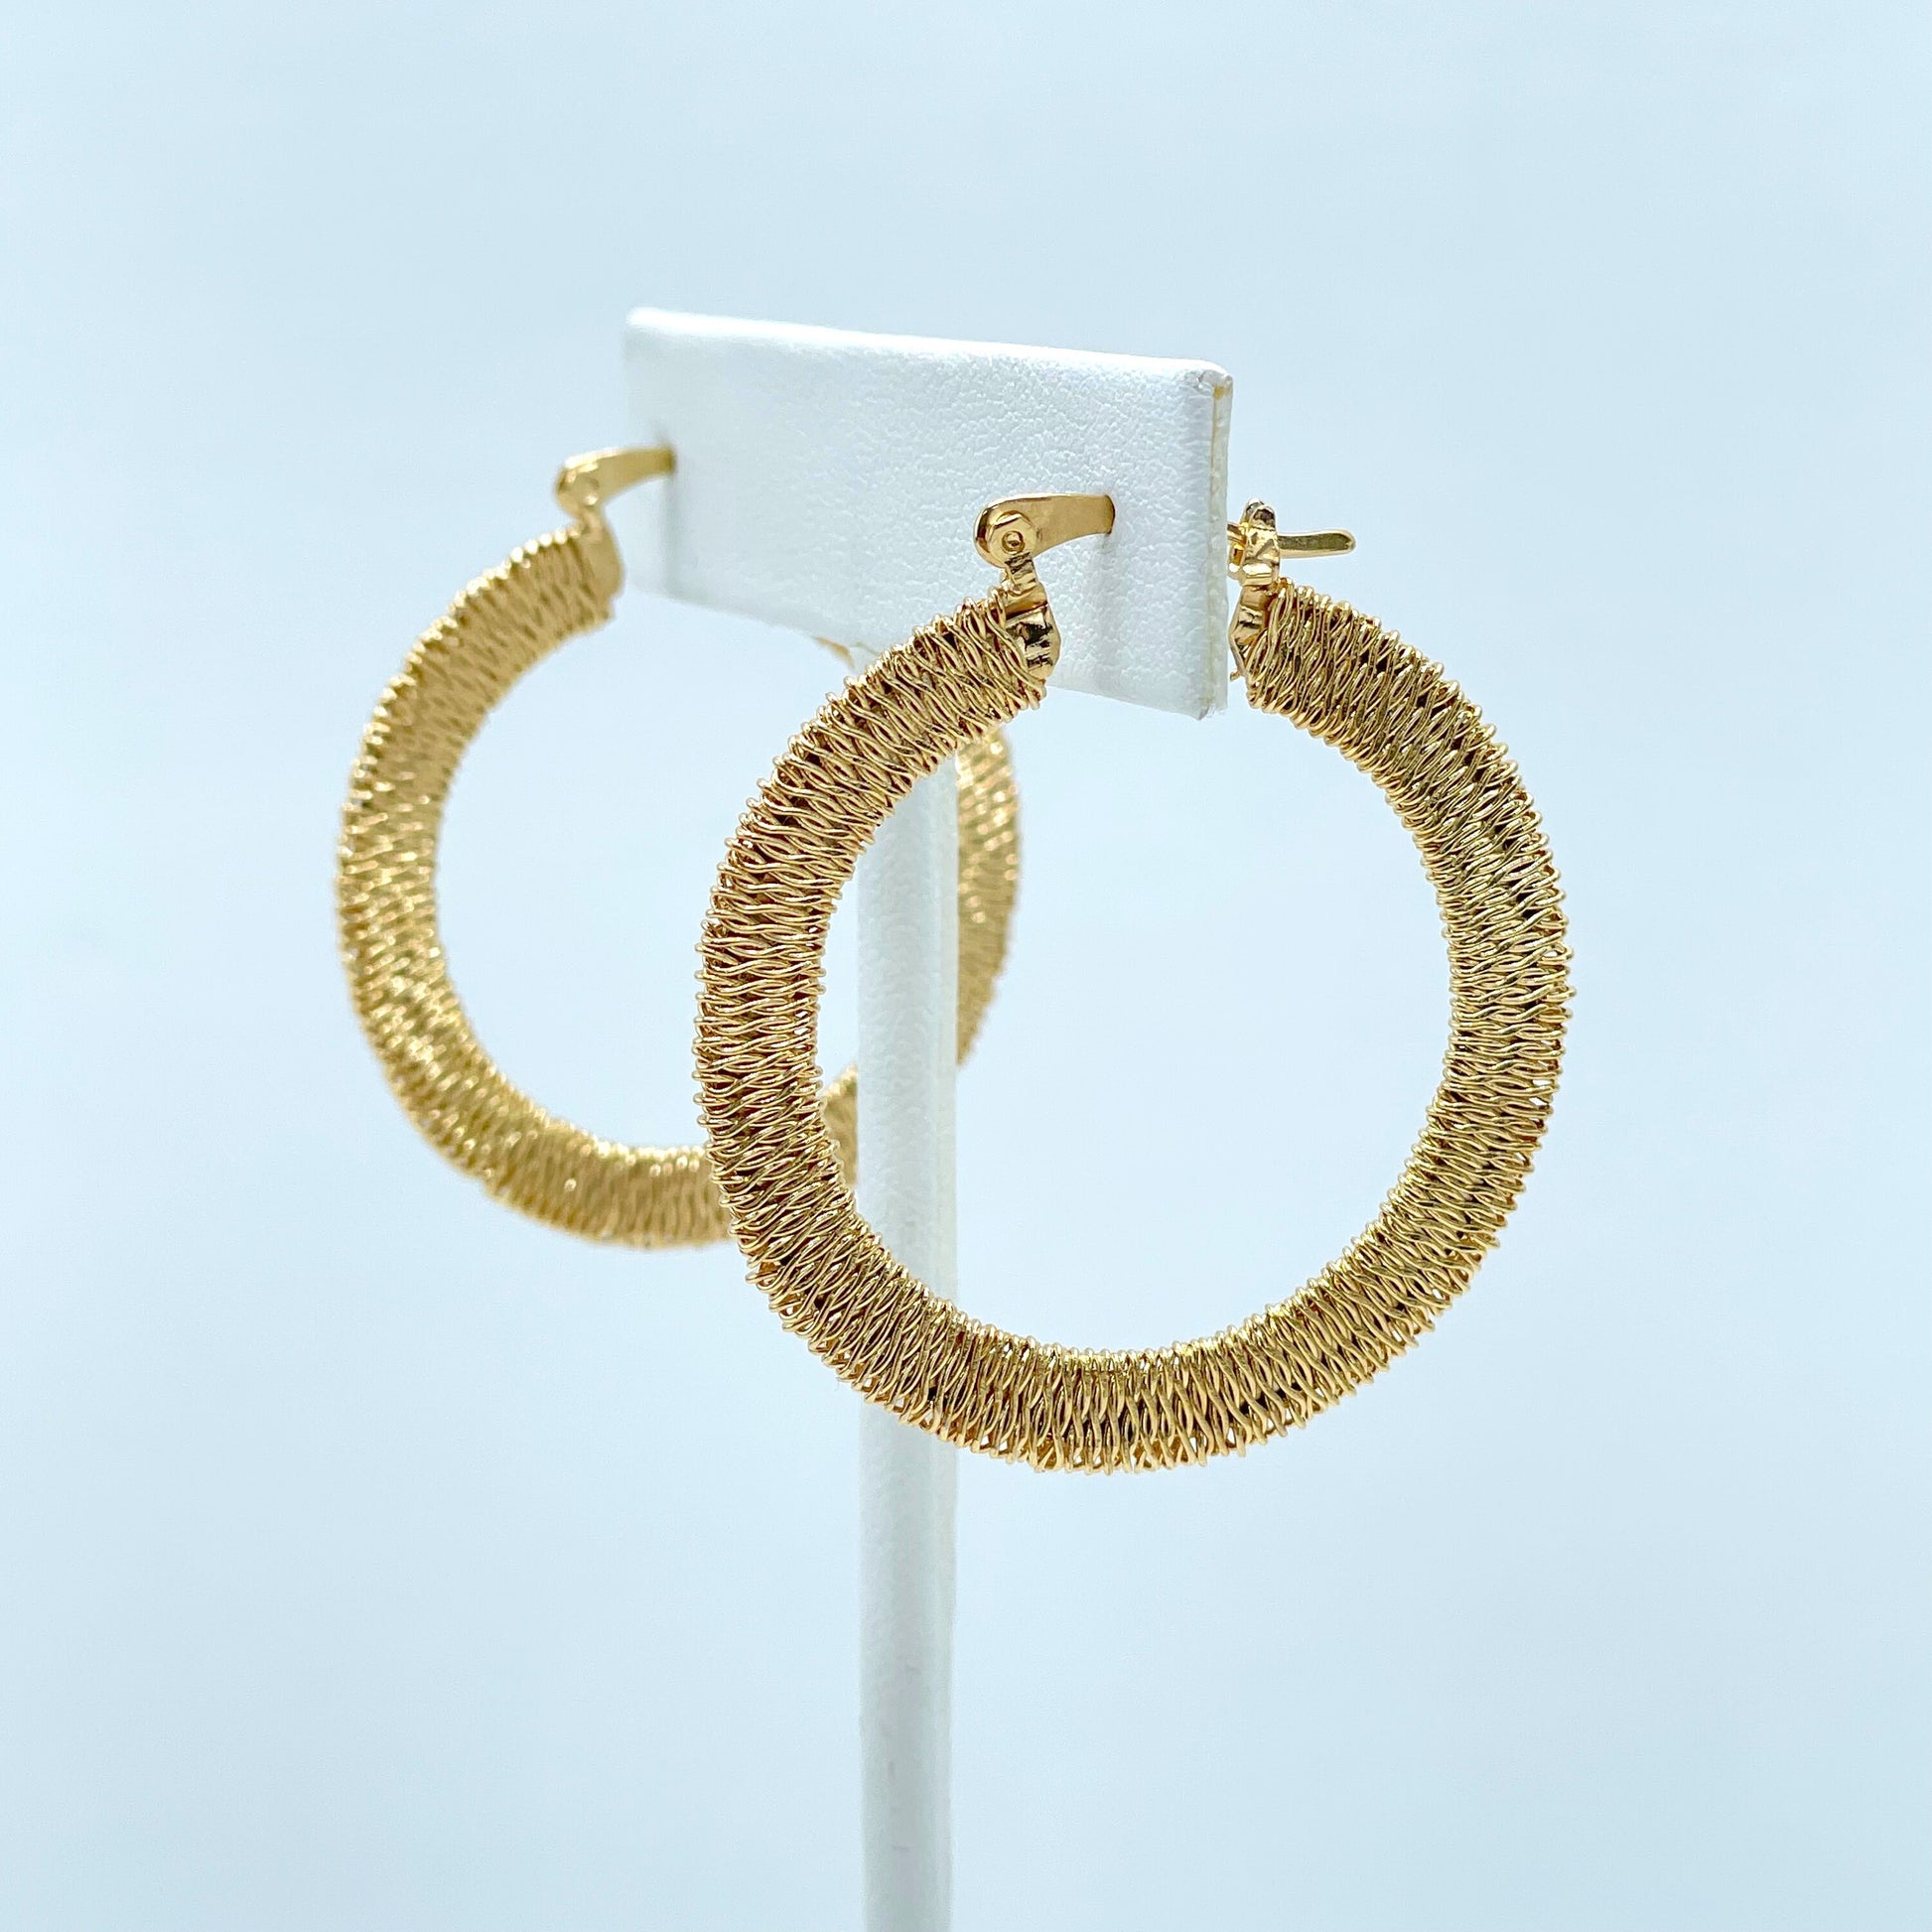 18k Gold Filled 33mm or 39mm Textured Hoops 5mm Thickness, Handmade Earrings Wholesale Jewelry Making Supplies